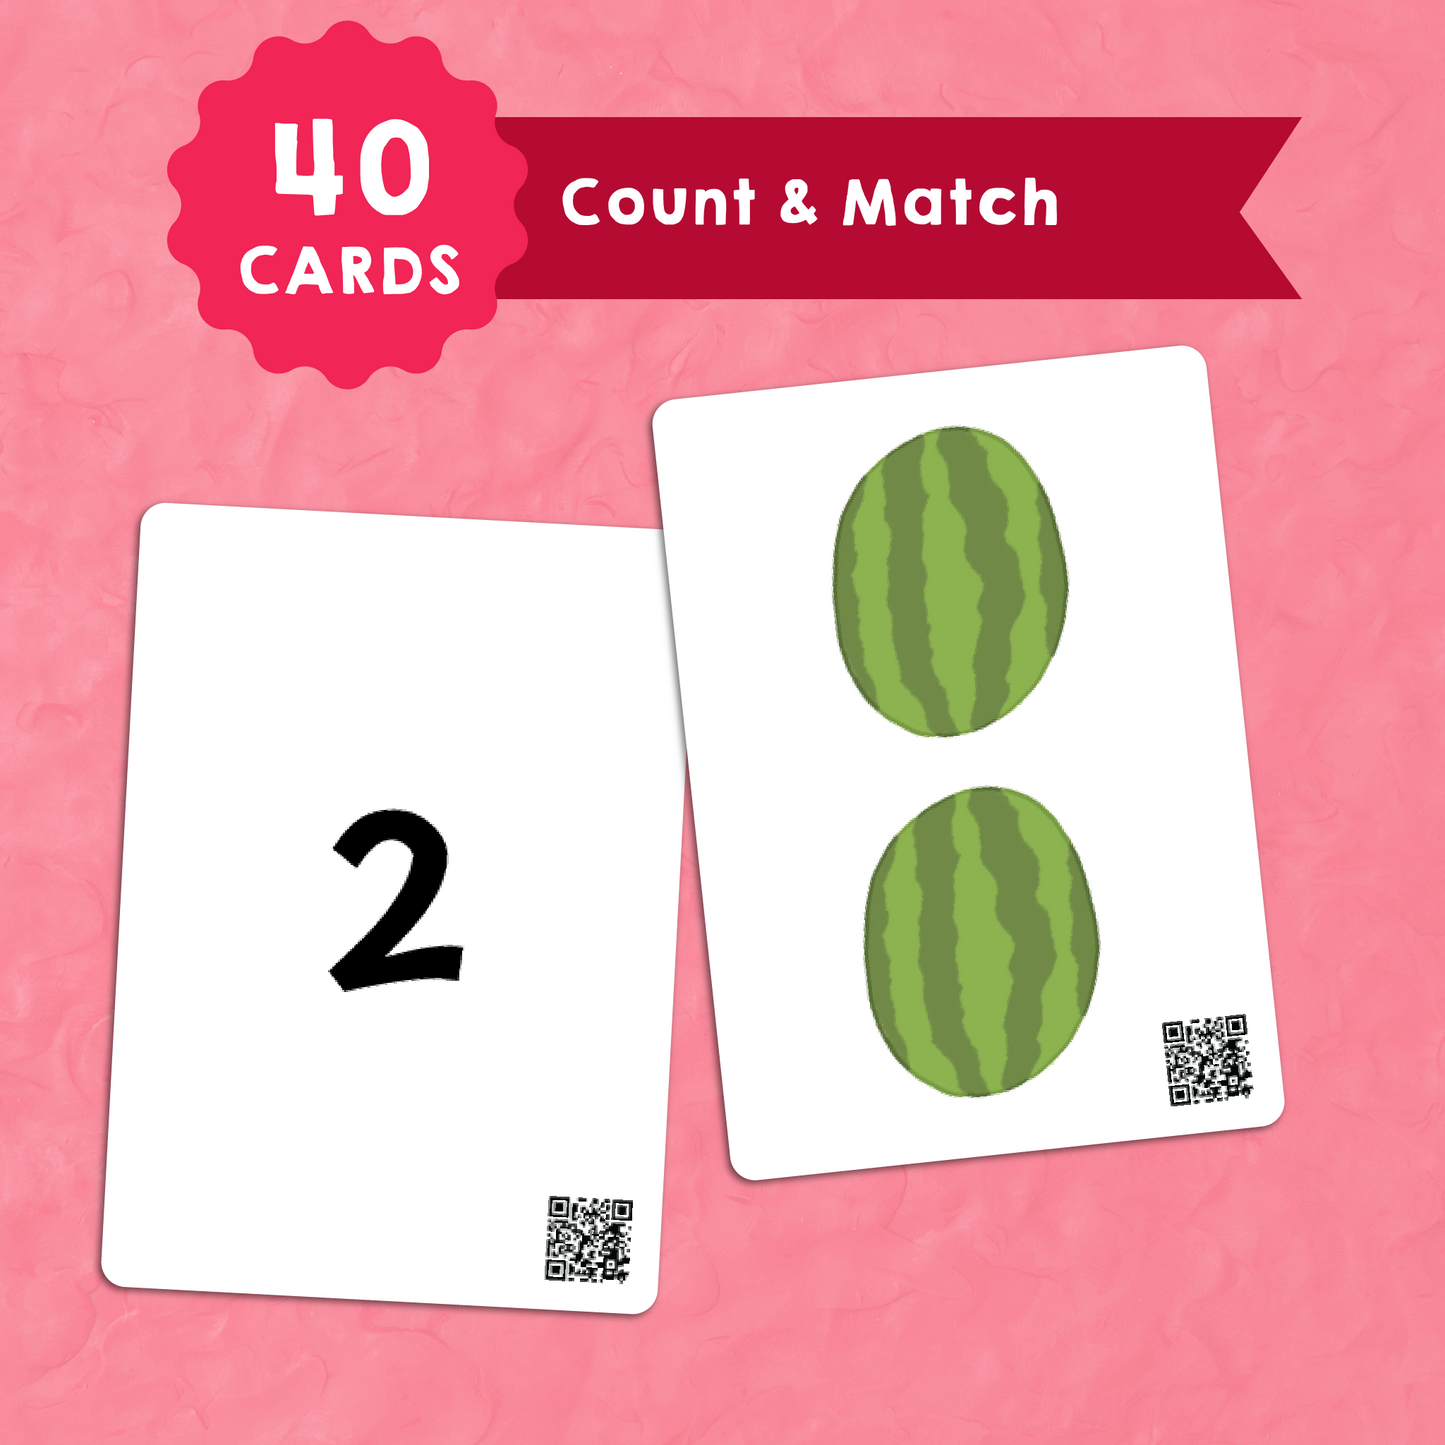 Flashcards - 1-20 Count and Match (40 Cards)